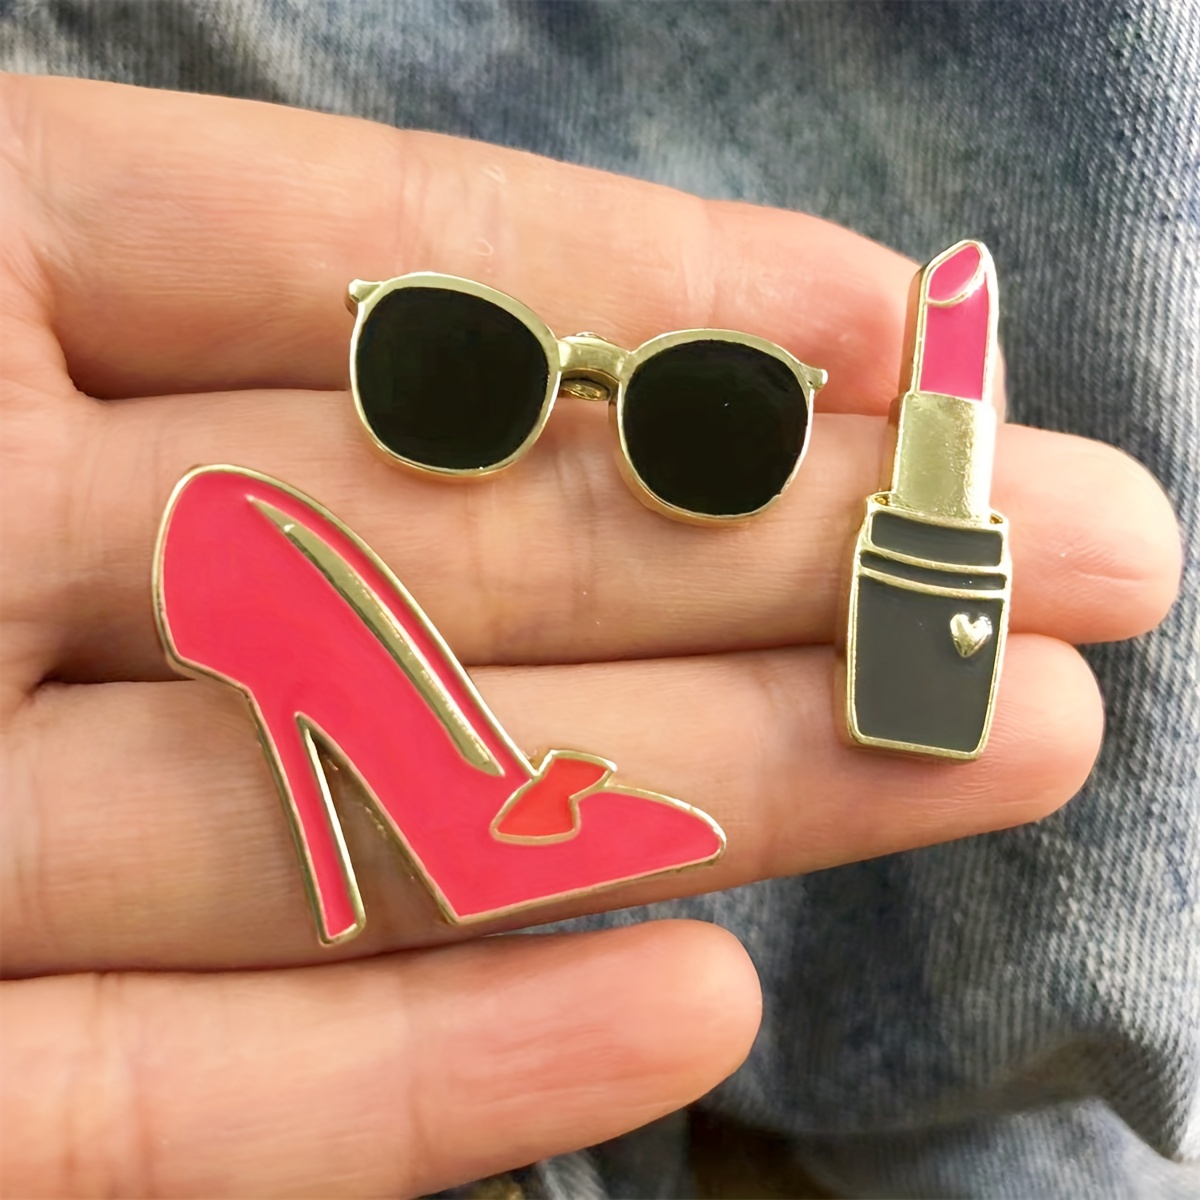 Pin on Clothes, Shoes and Accessories